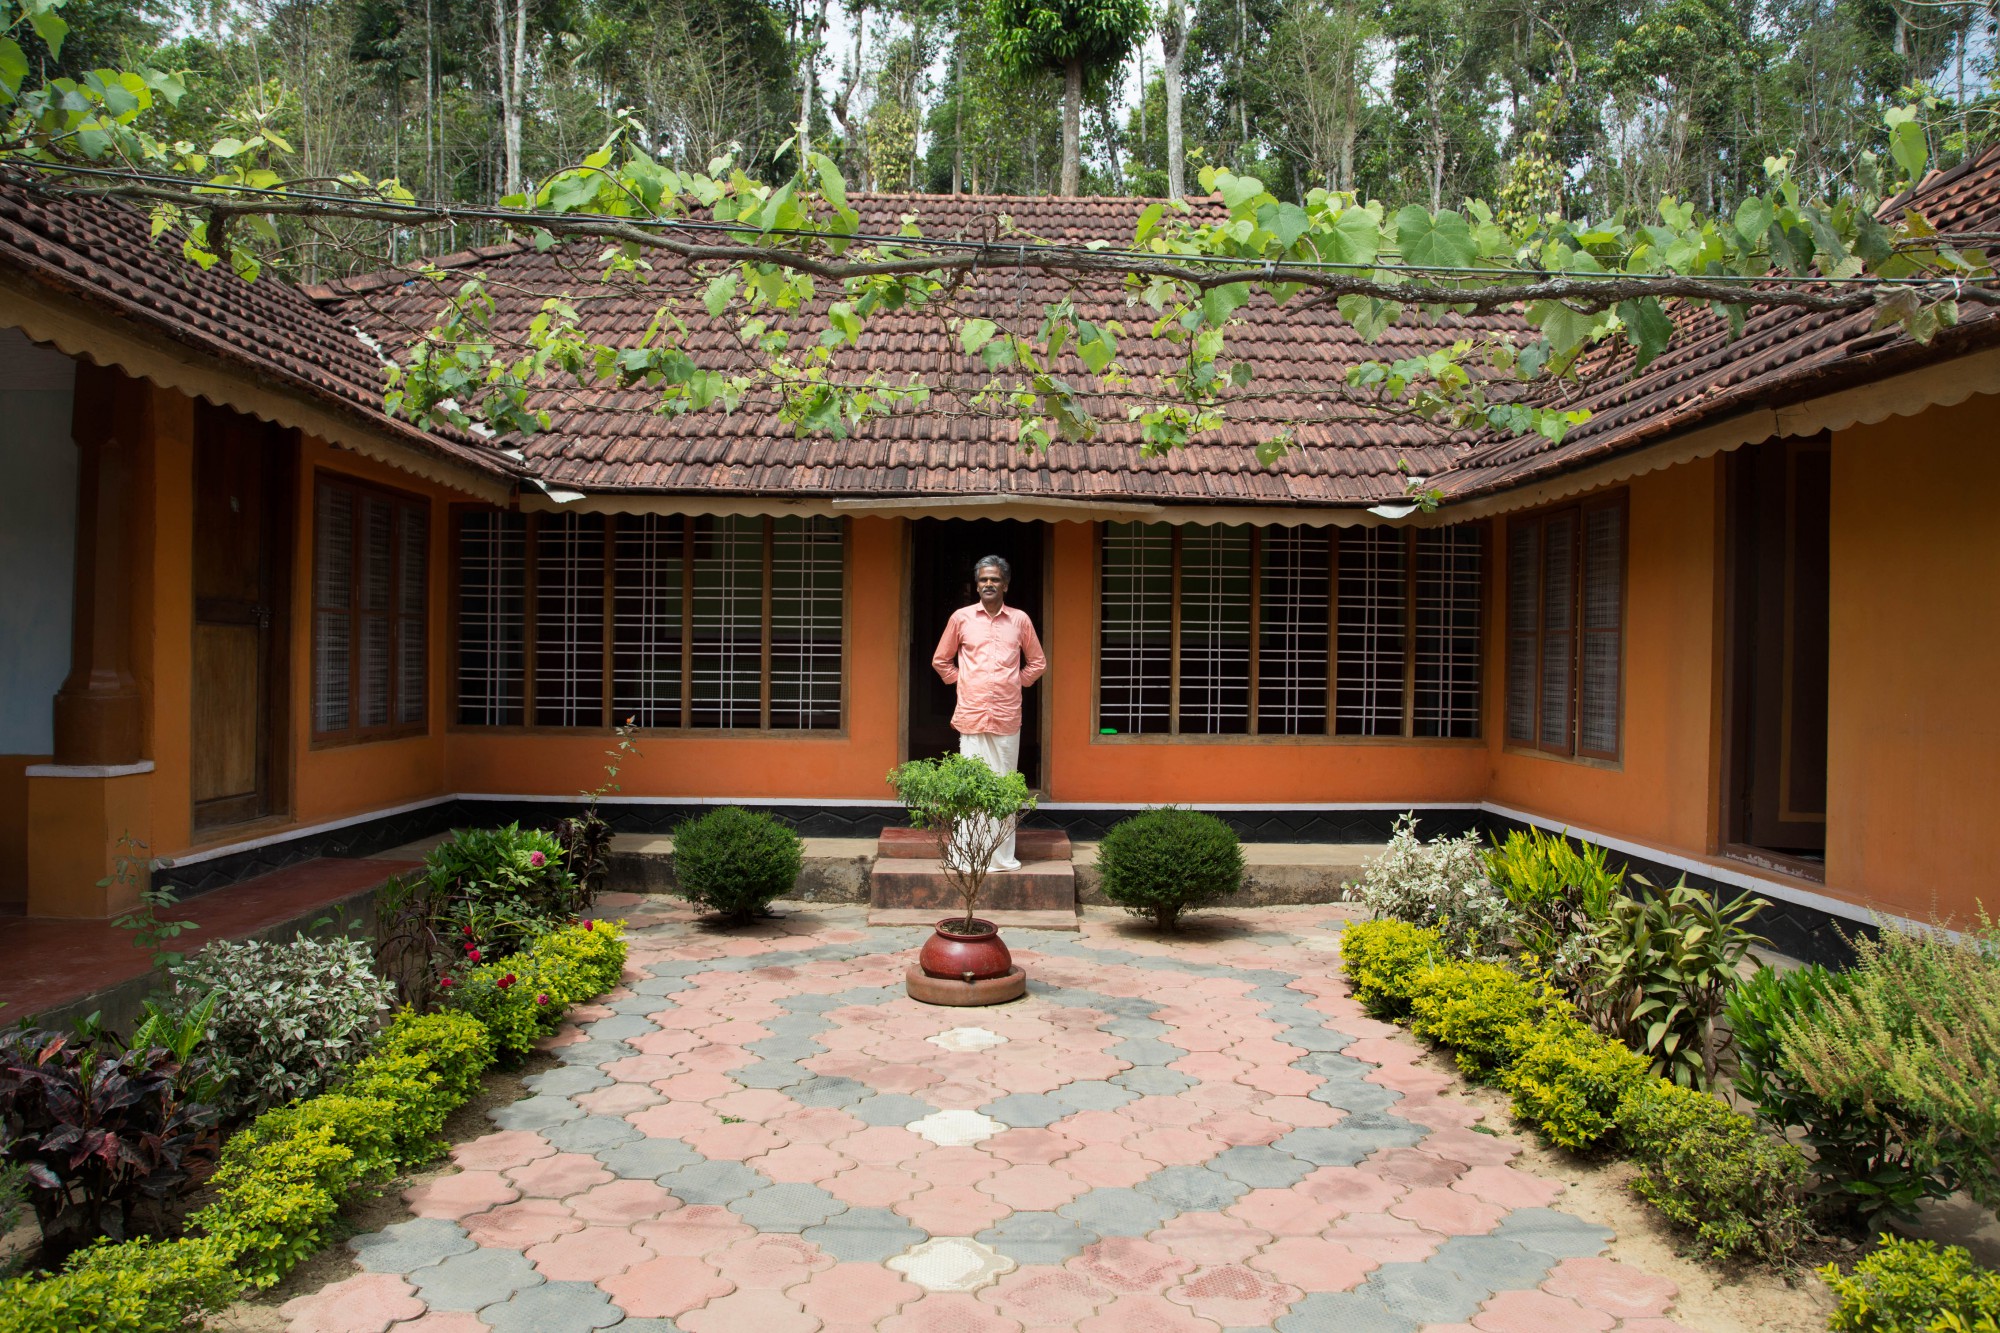 Kesavan stands proudly in front of his home. The home he was born in and the home her granddaughter Niranjana will grow up in. Photo by Gayatri Ganju.